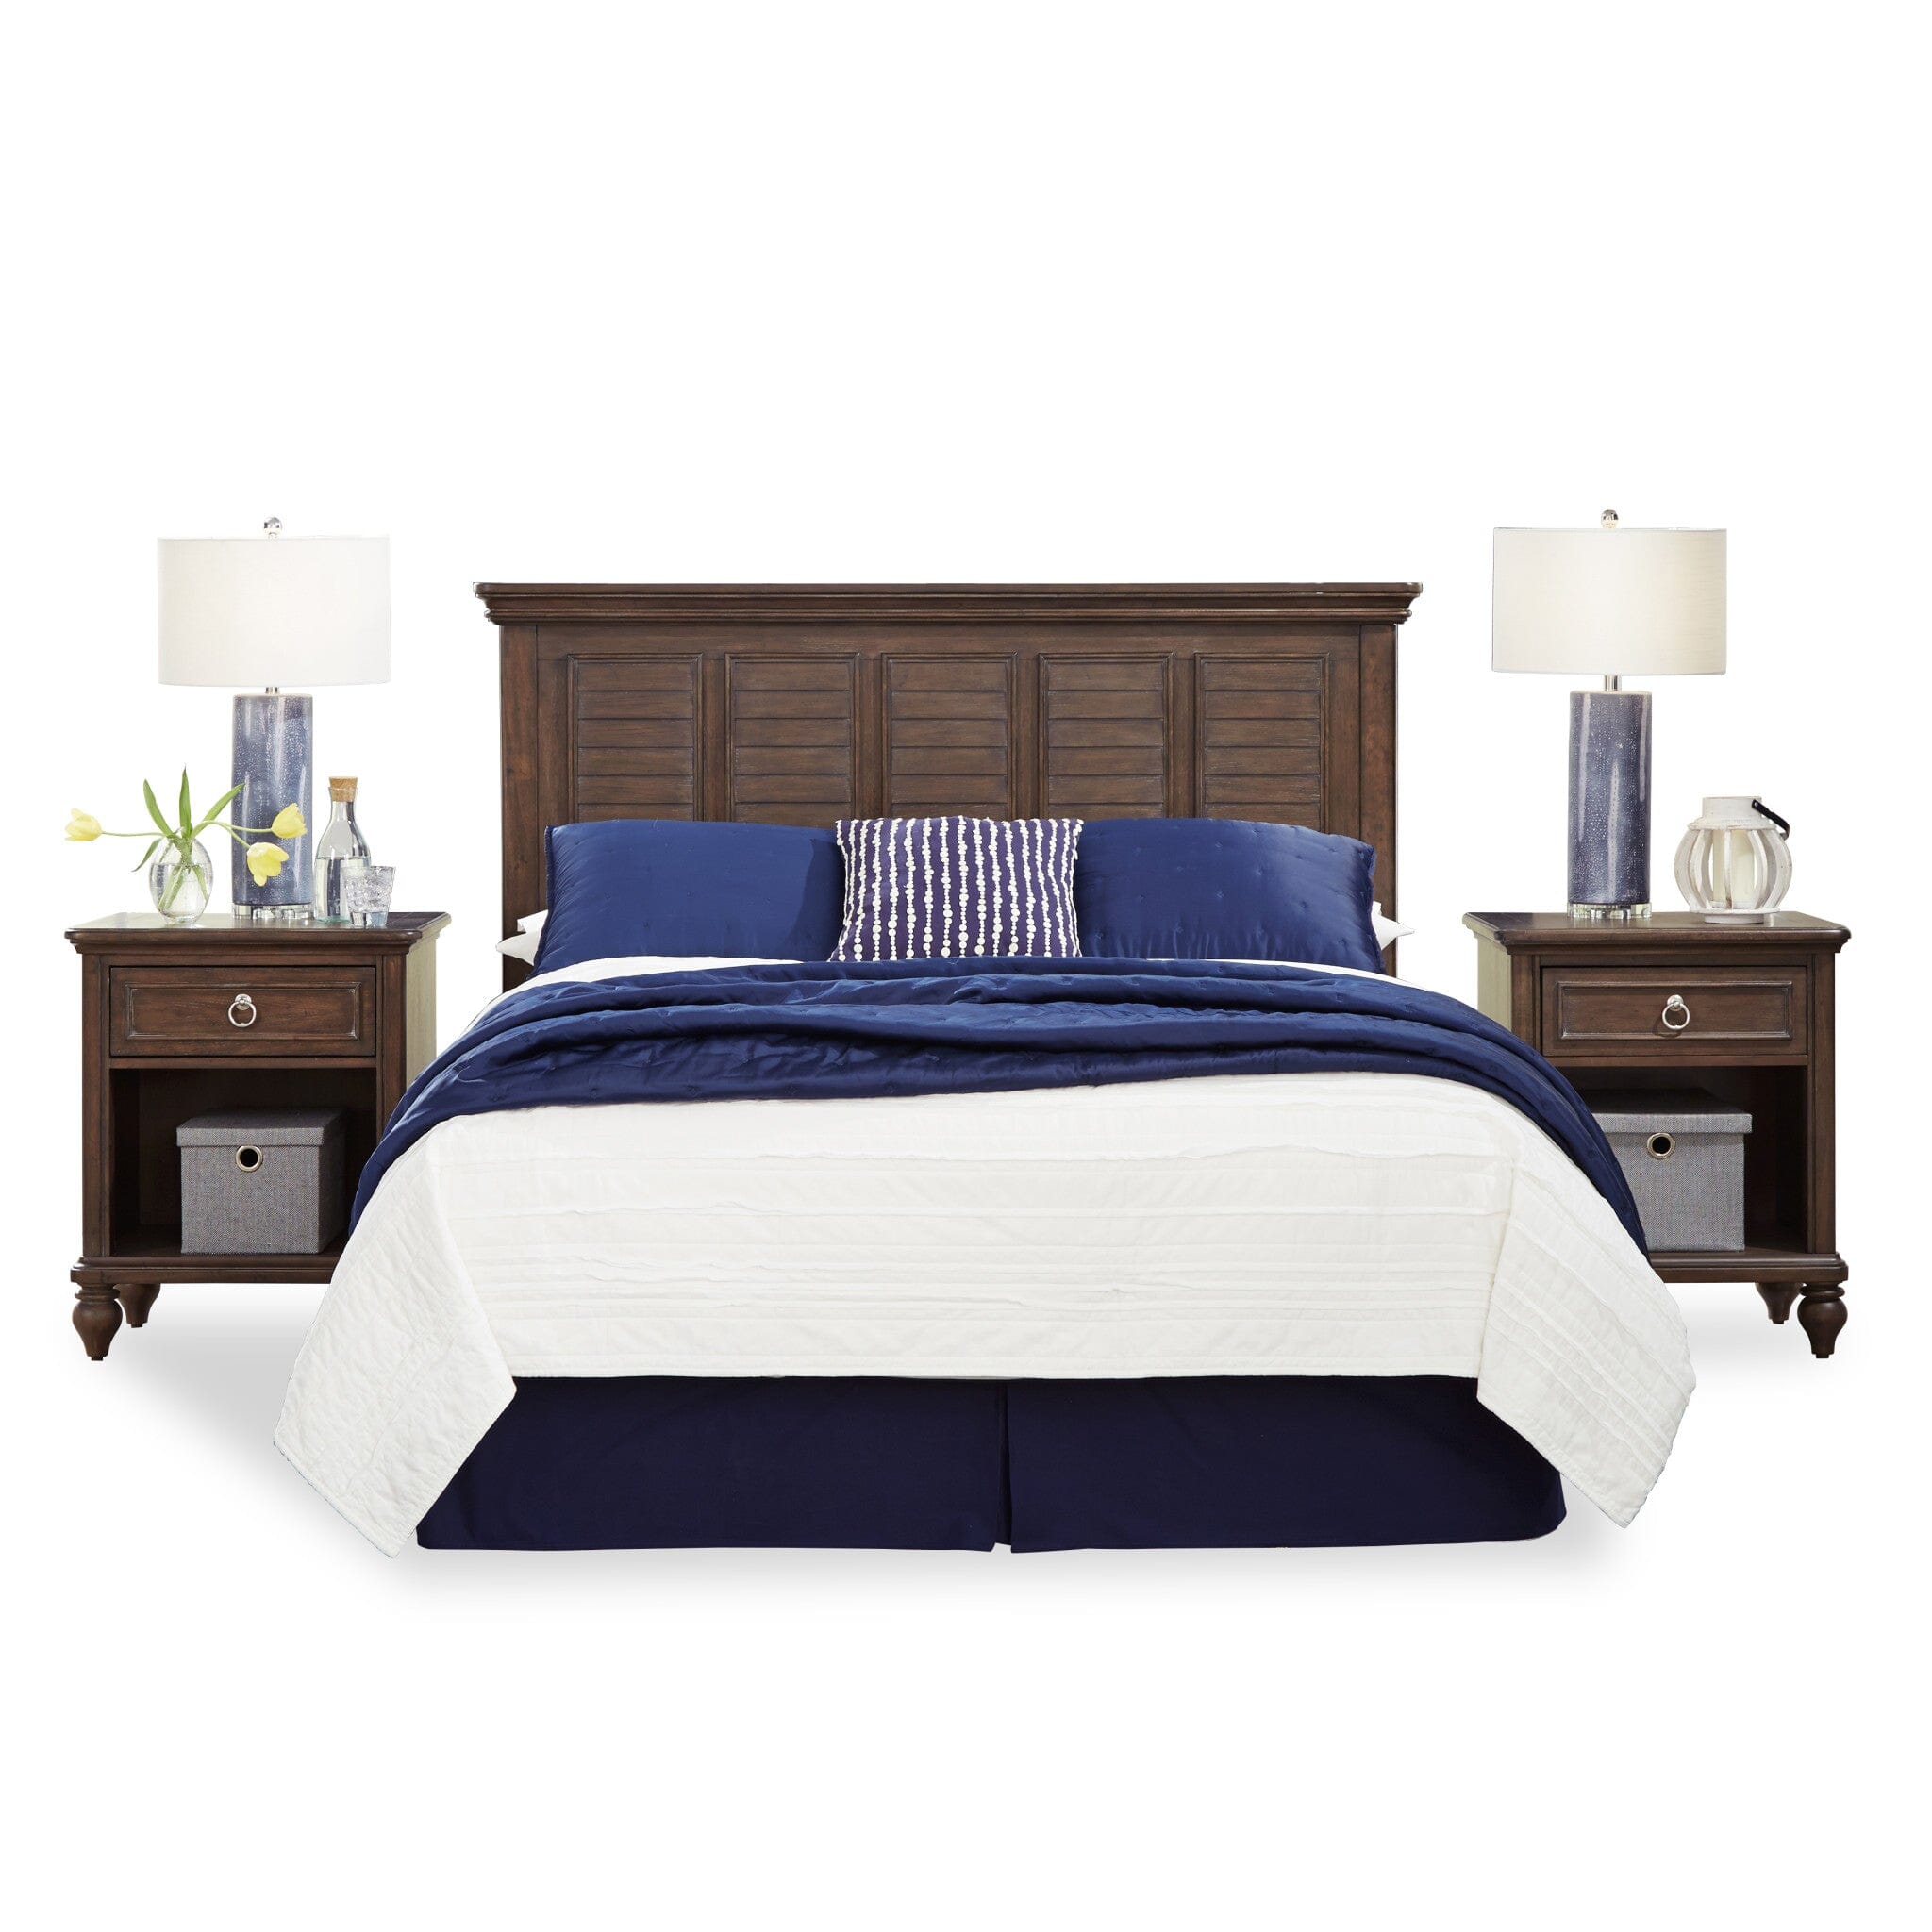 Coastal Queen Headboard and Two Nightstands By Southport Queen Bedroom Set Southport